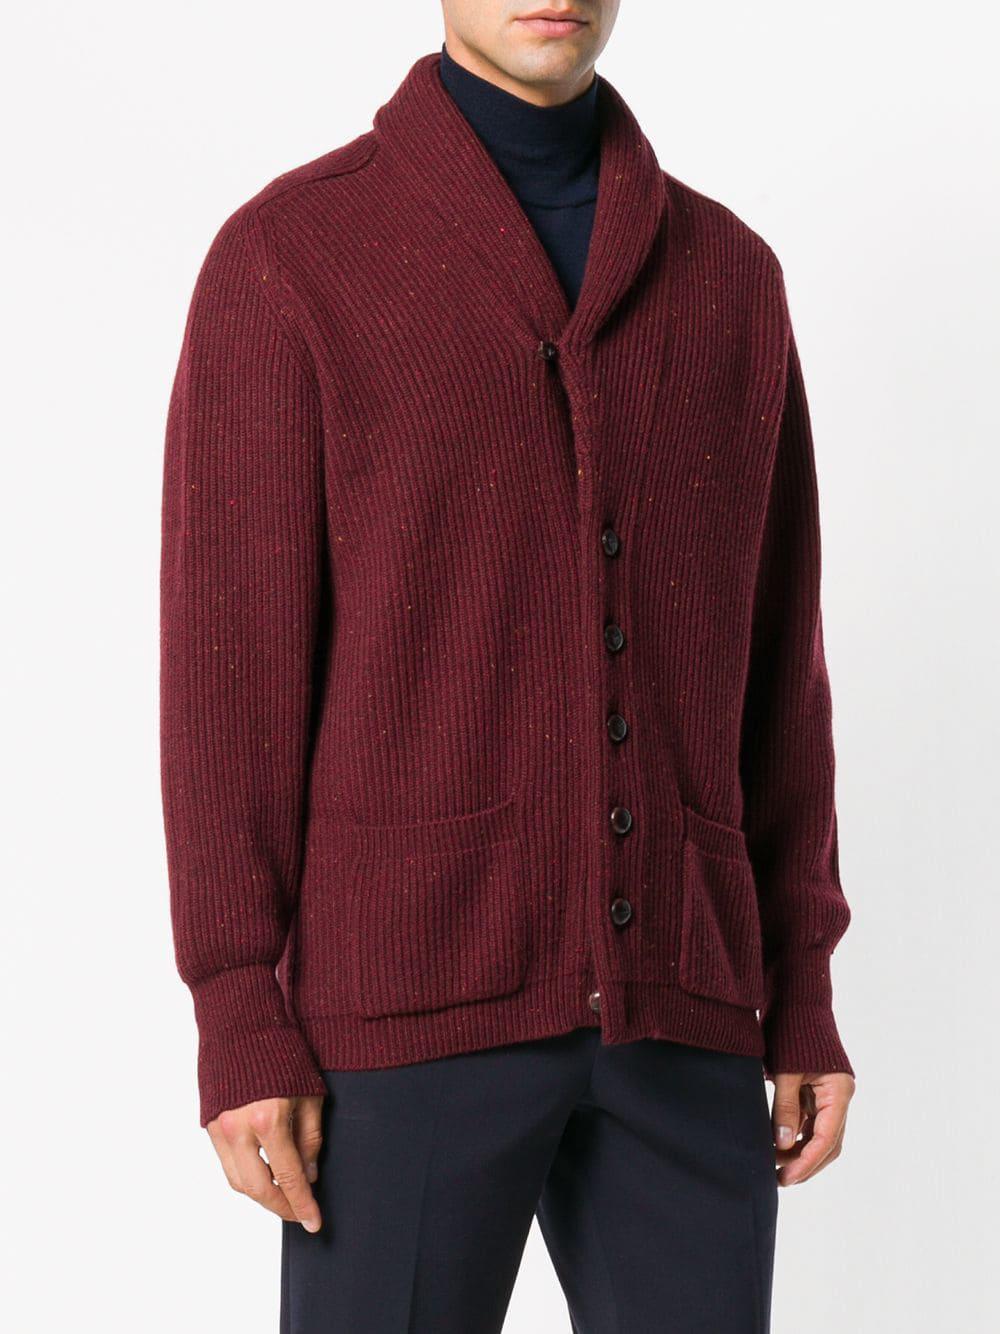 N Peal Cashmere Cashmere Cardigan  in Red  for Men  Lyst